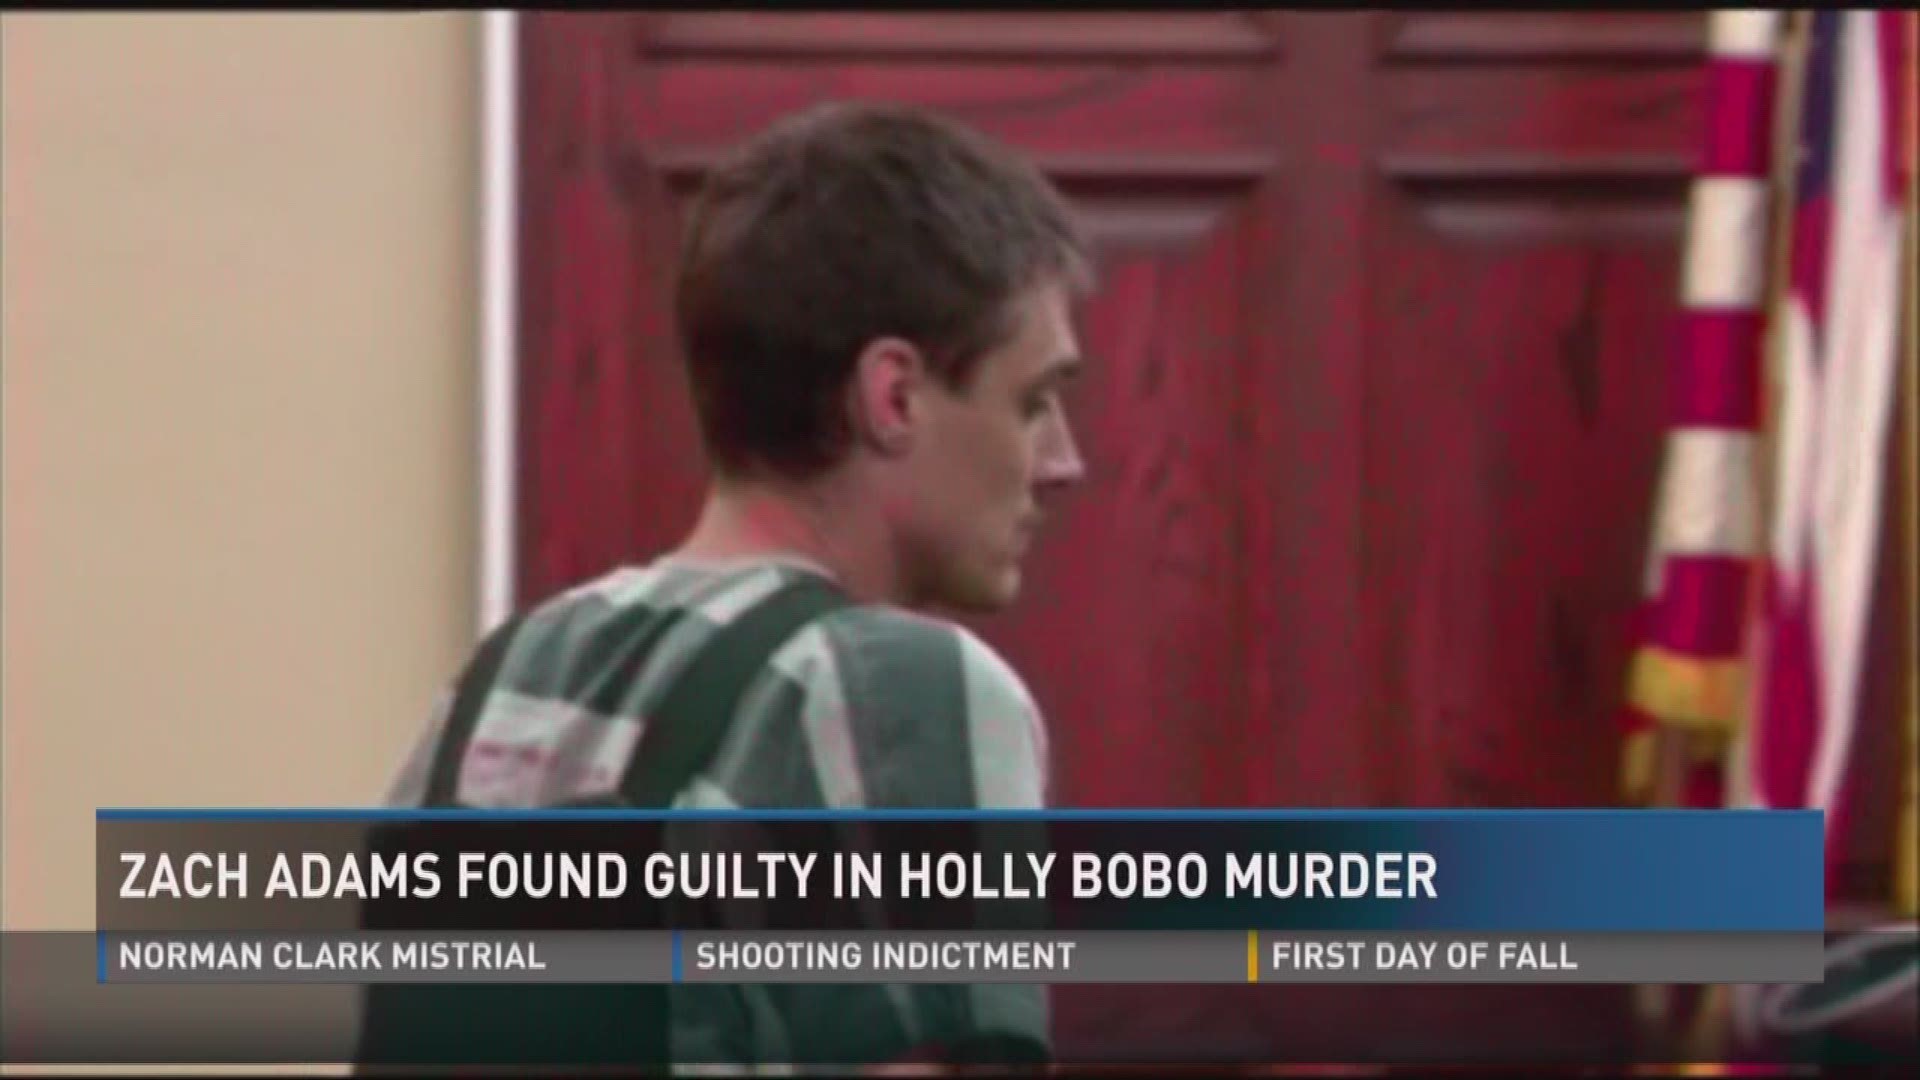 Zach Adams Sentenced To Life Without Parole Plus 50 Years For Murdering Holly Bobo